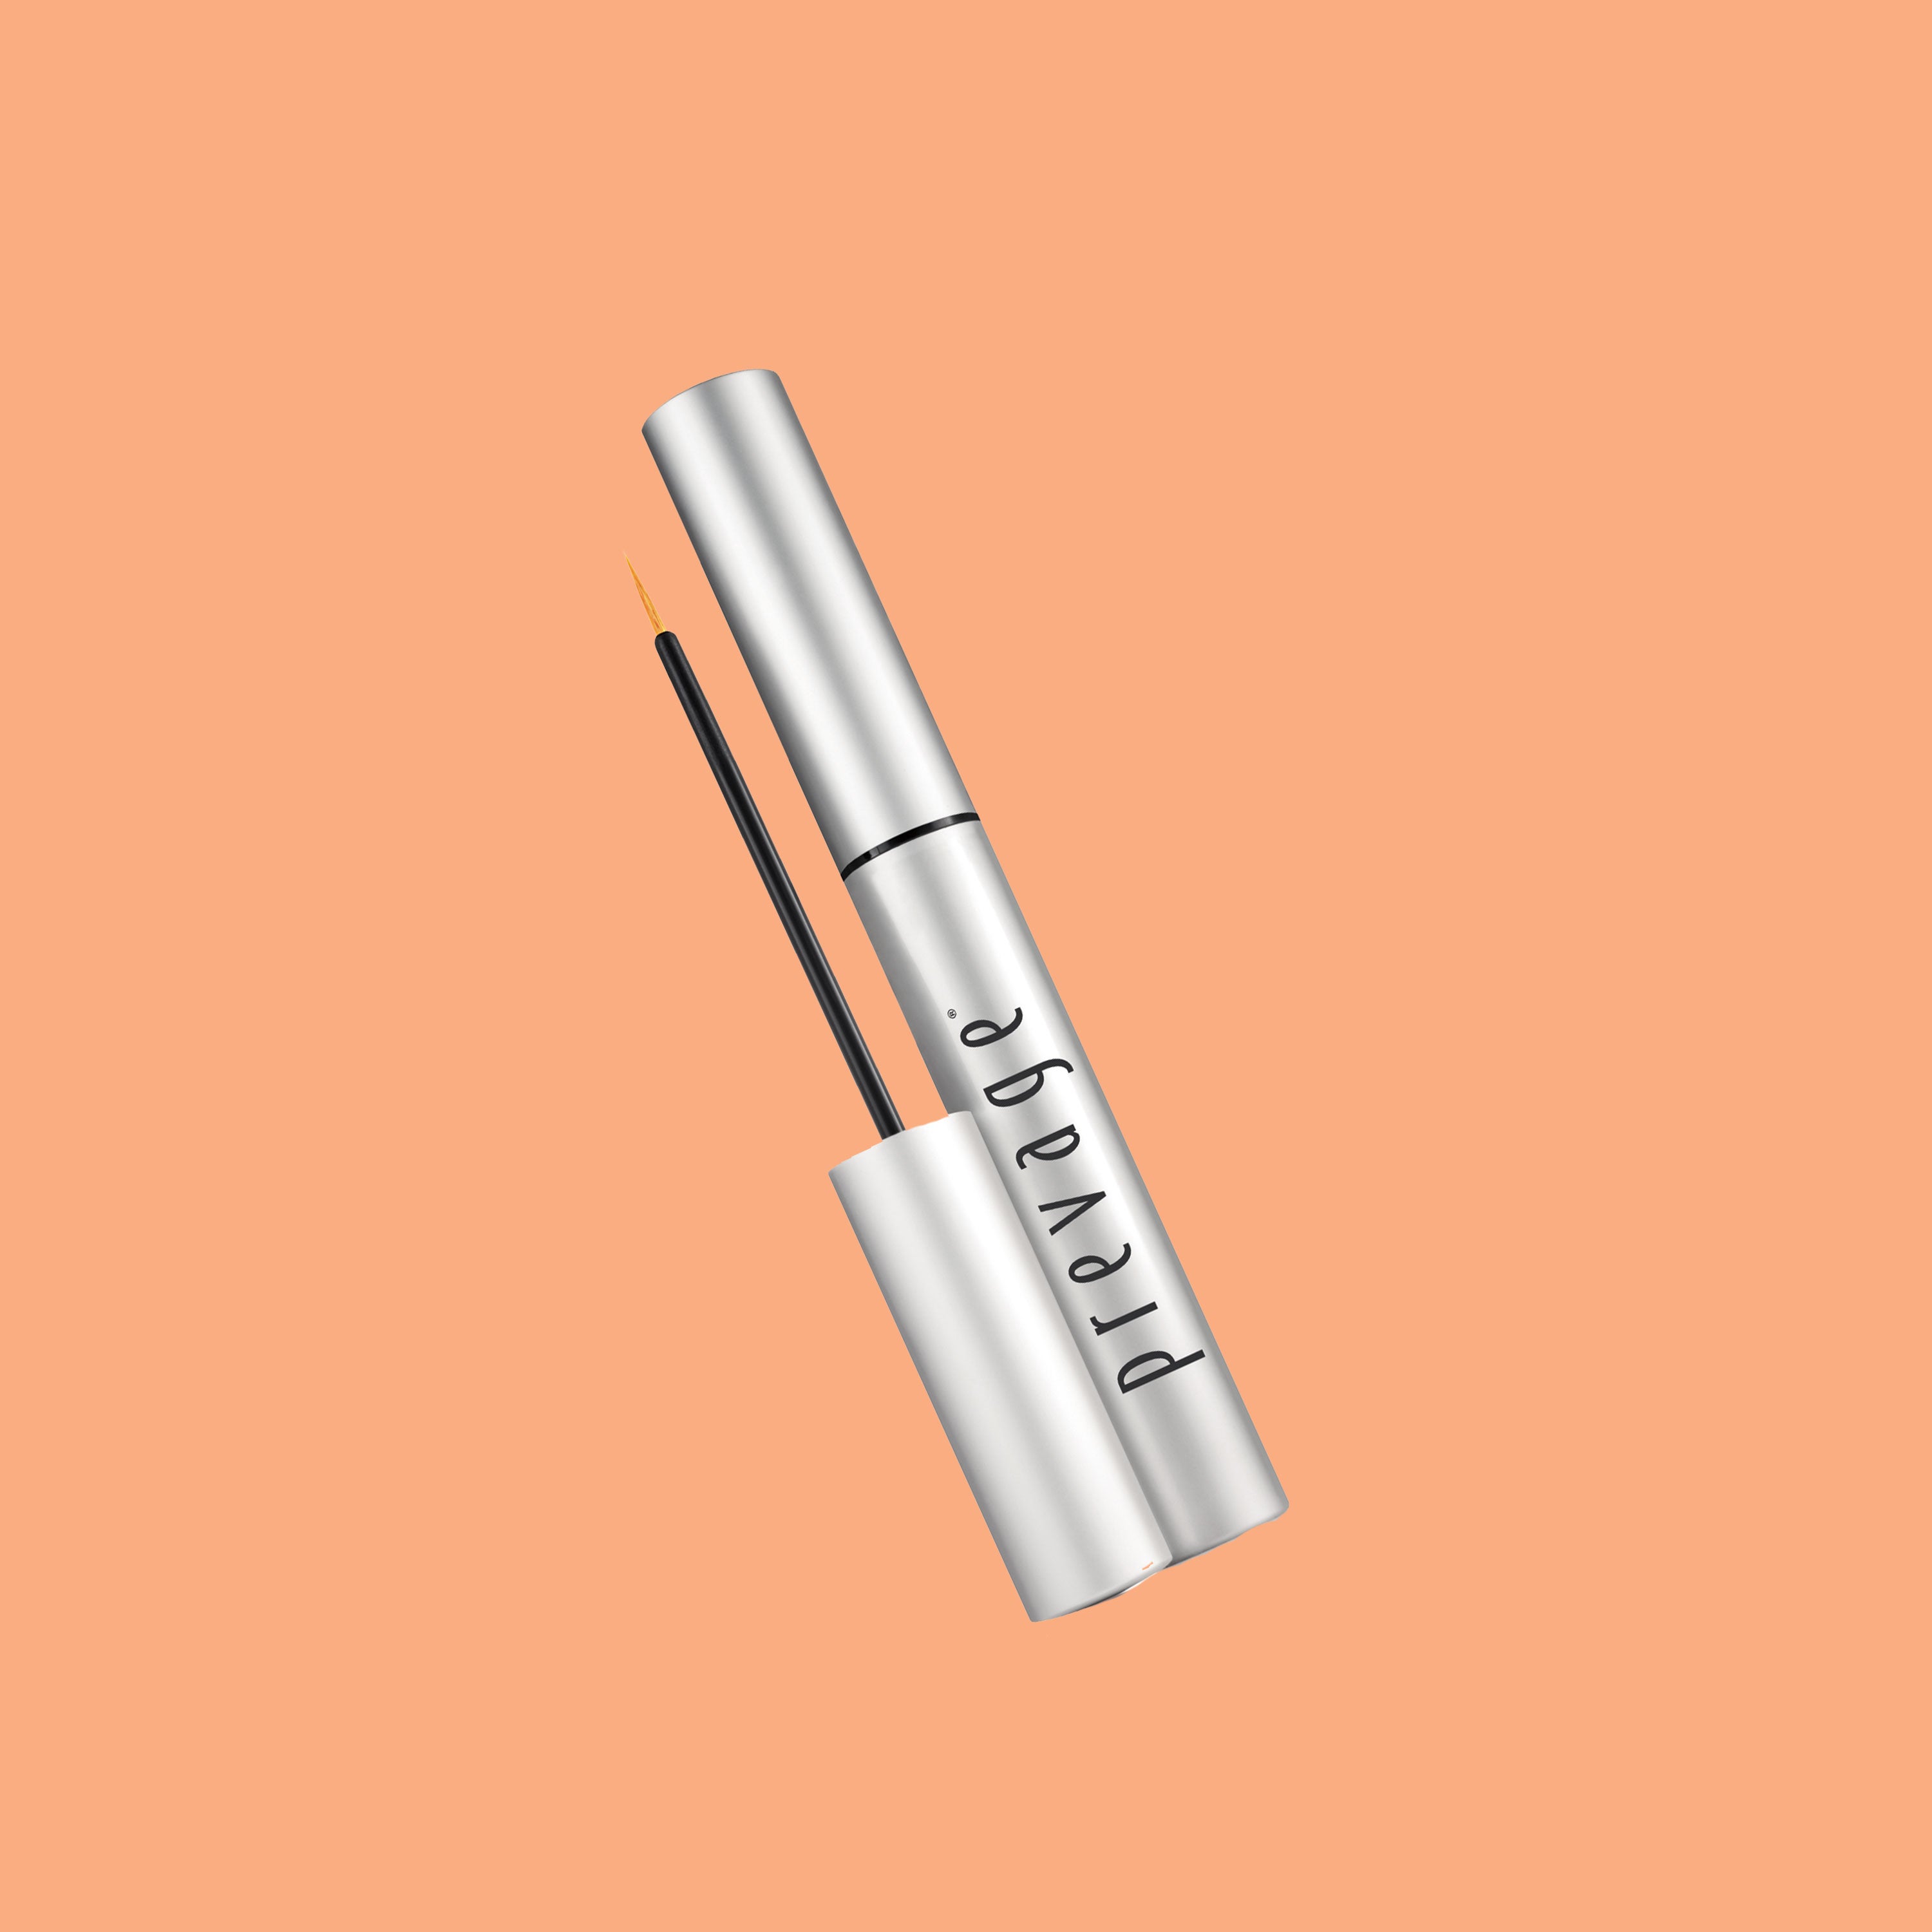 10 Growth Serums To Try For Fuller and Longer Lashes
